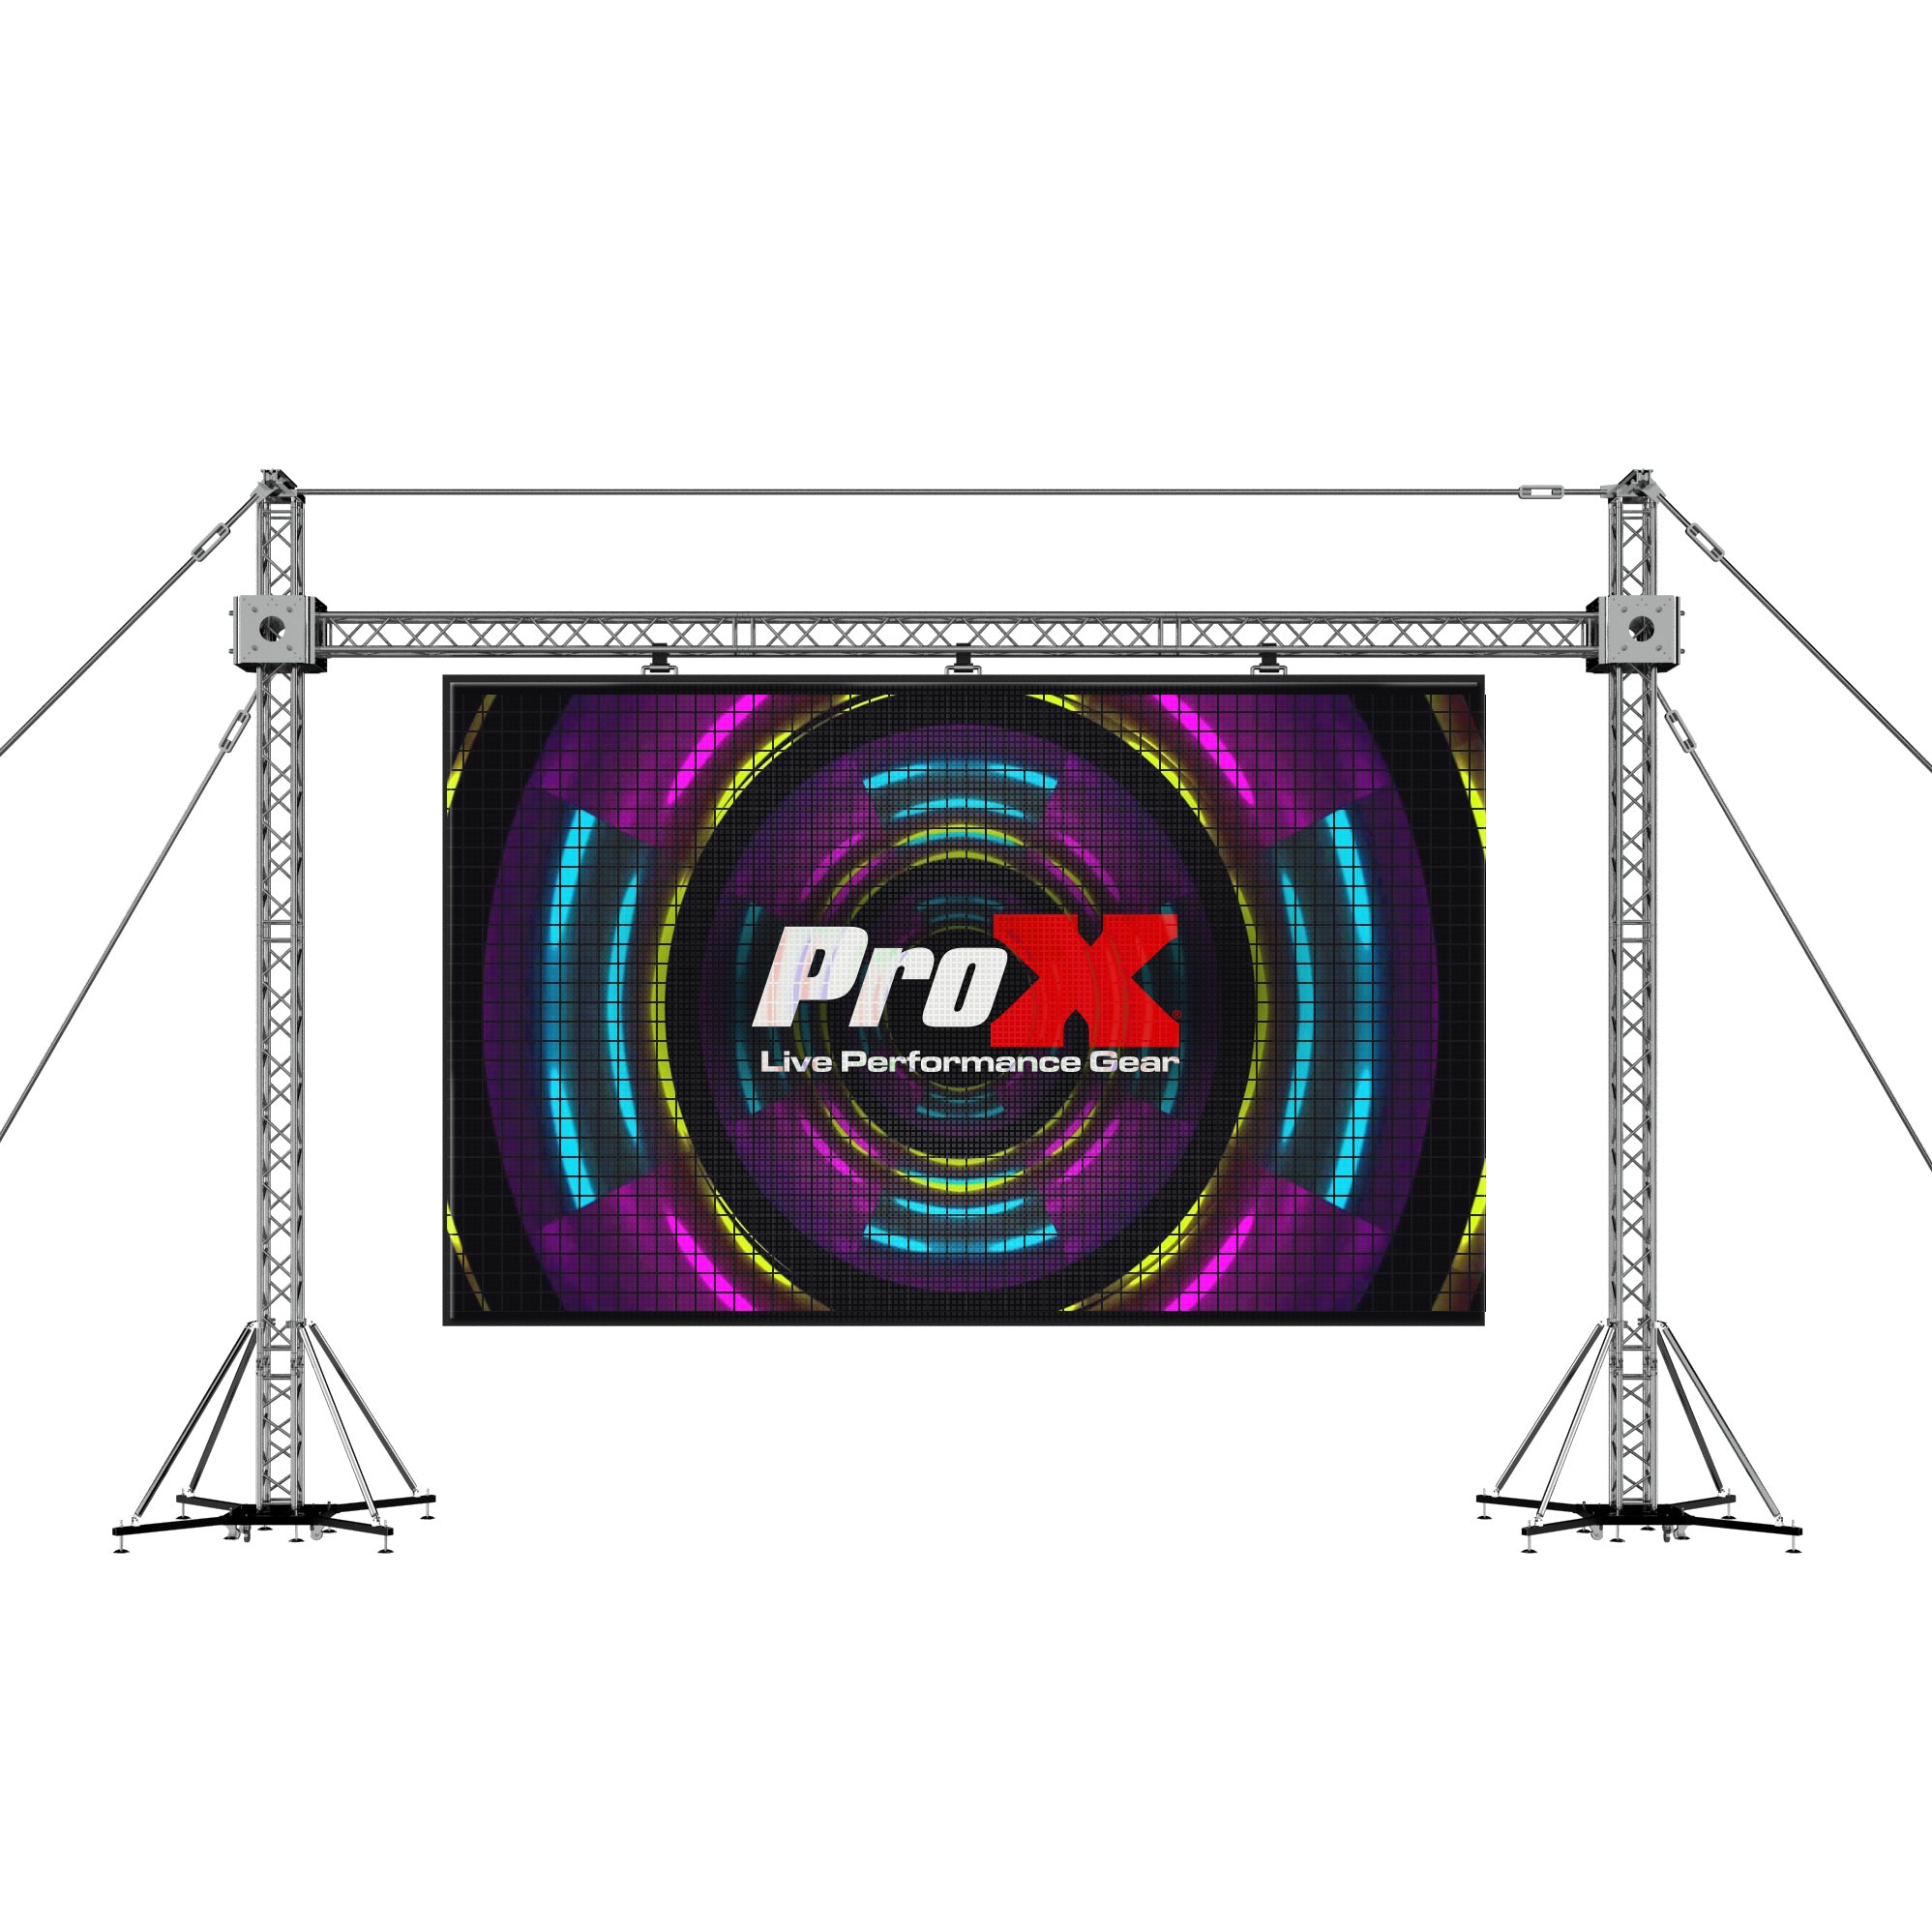 Pro X LED Screen Display Panel Video Fly Wall Truss Ground Support System 20'W x 13'H Outdoor w/ Hoist XTP-GS2013